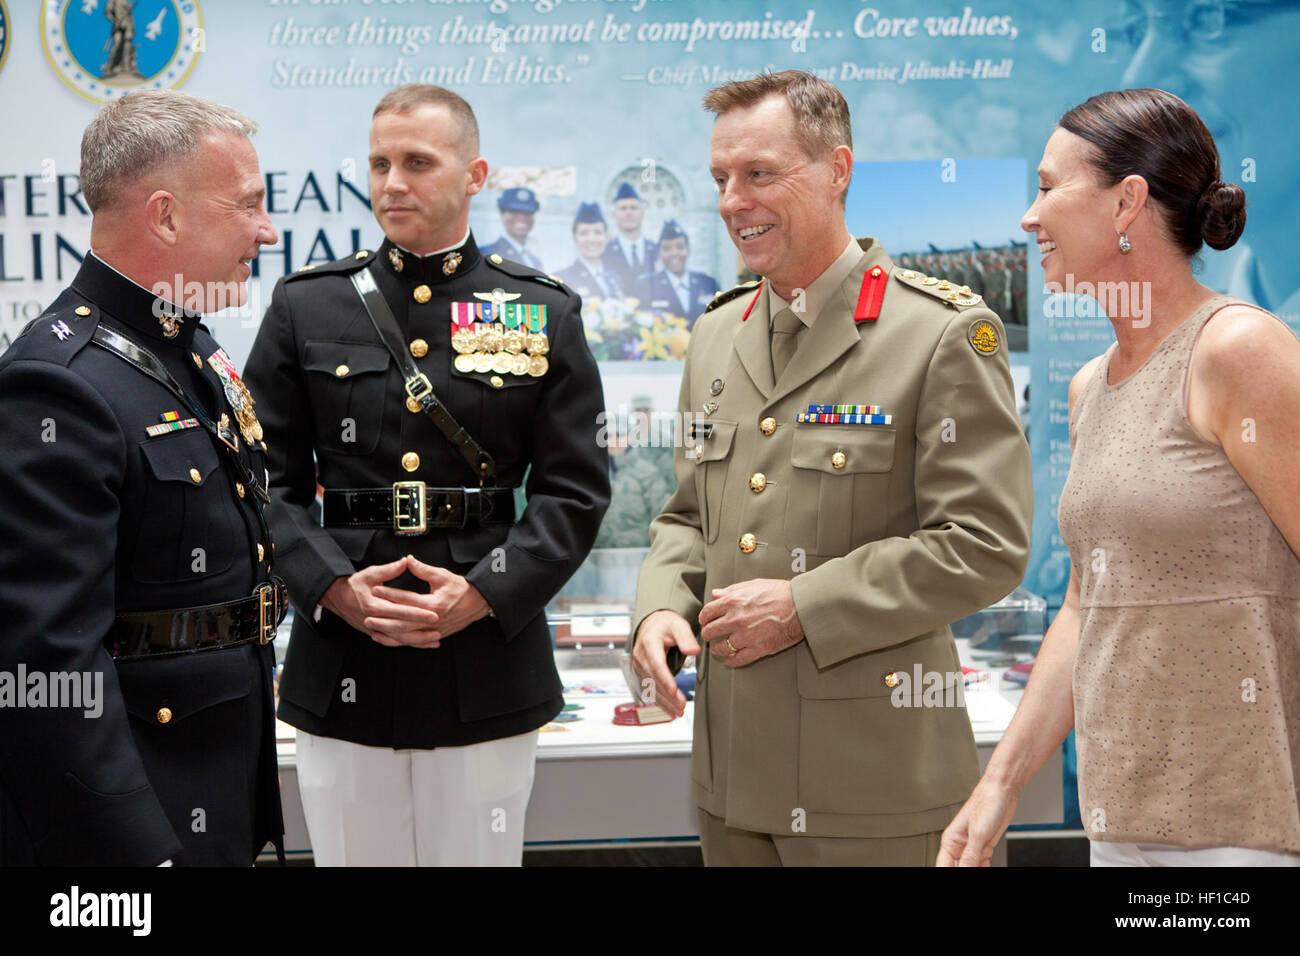 U.S. Marine Corps Maj. Gen. Kenneth F. McKenzie Jr., left, the Marine Corps representative to the Defense Department's Quadrennial Defense Review and the Sunset Parade host, speaks with a foreign military officer, second from right, and other guests during the parade reception at the Women in Military Service for America Memorial at Arlington National Cemetery in Arlington, Va., July 9, 2013. A Sunset Parade was held every Tuesday during the summer months. (U.S. Marine Corps photo by Cpl. Tia Dufour/Released) Sunset Parade 130709-M-KS211-013 Stock Photo